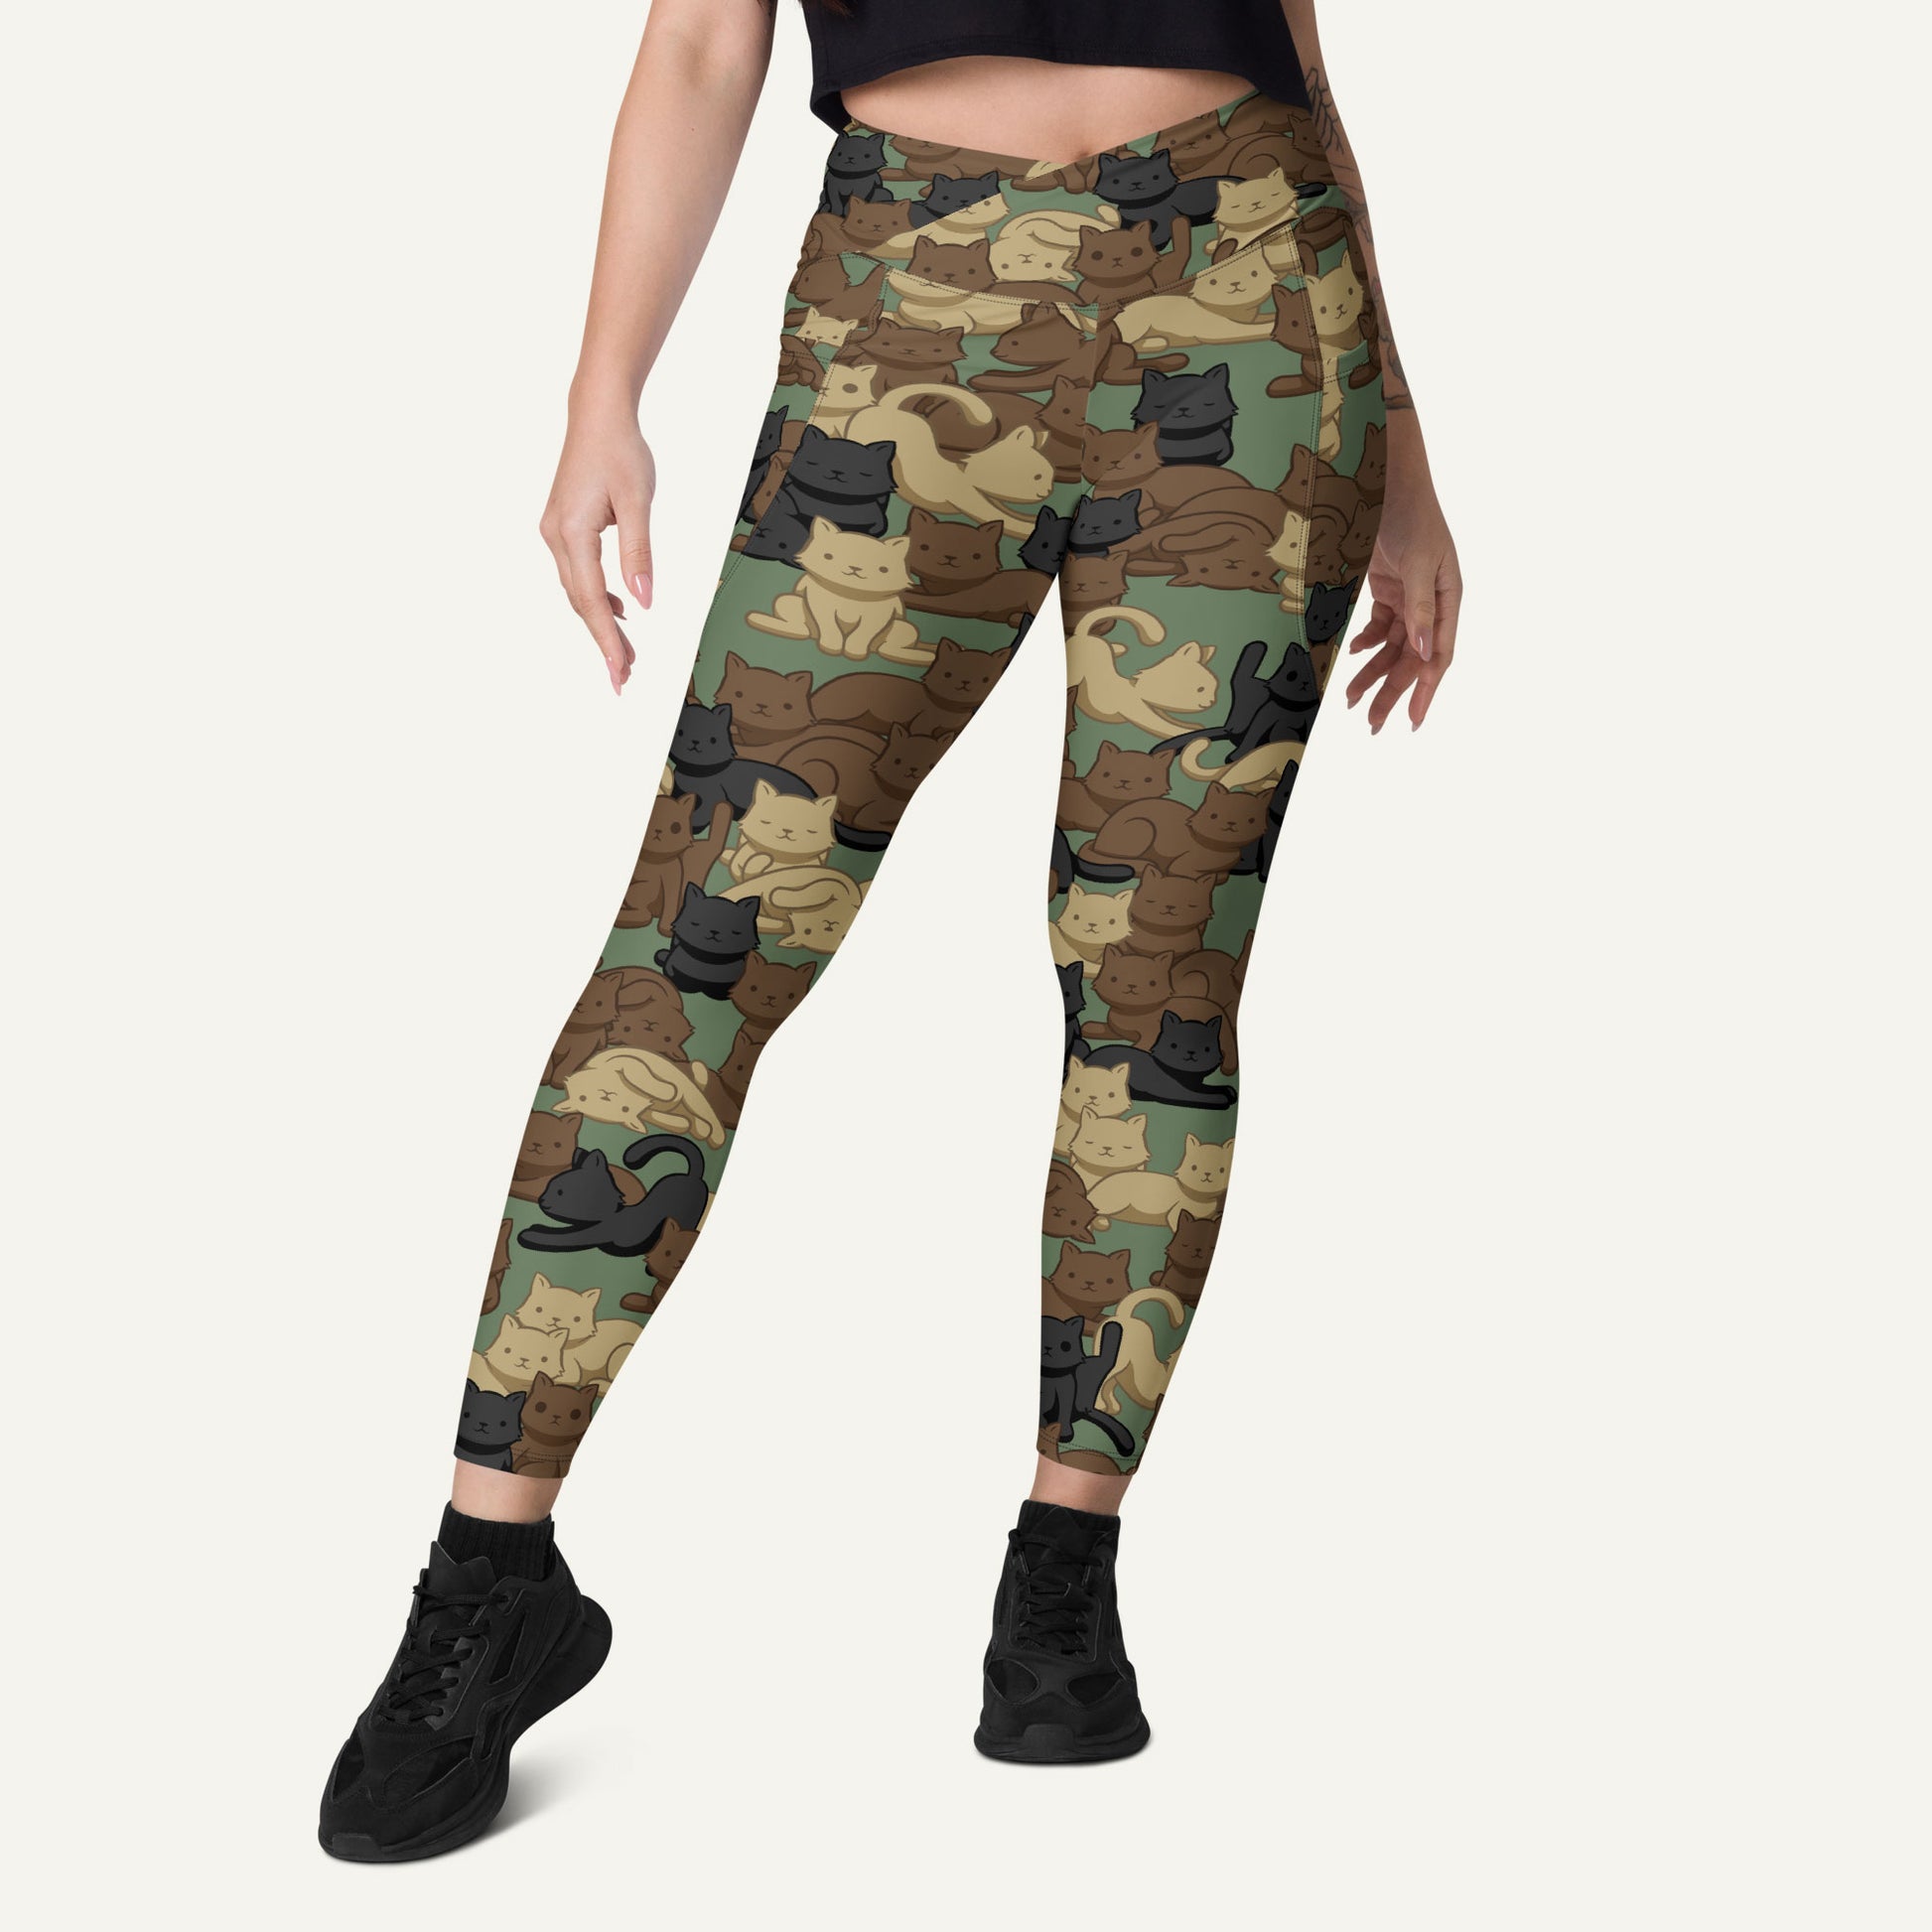 Cats Camouflage Woodland High-Waisted Crossover Leggings With